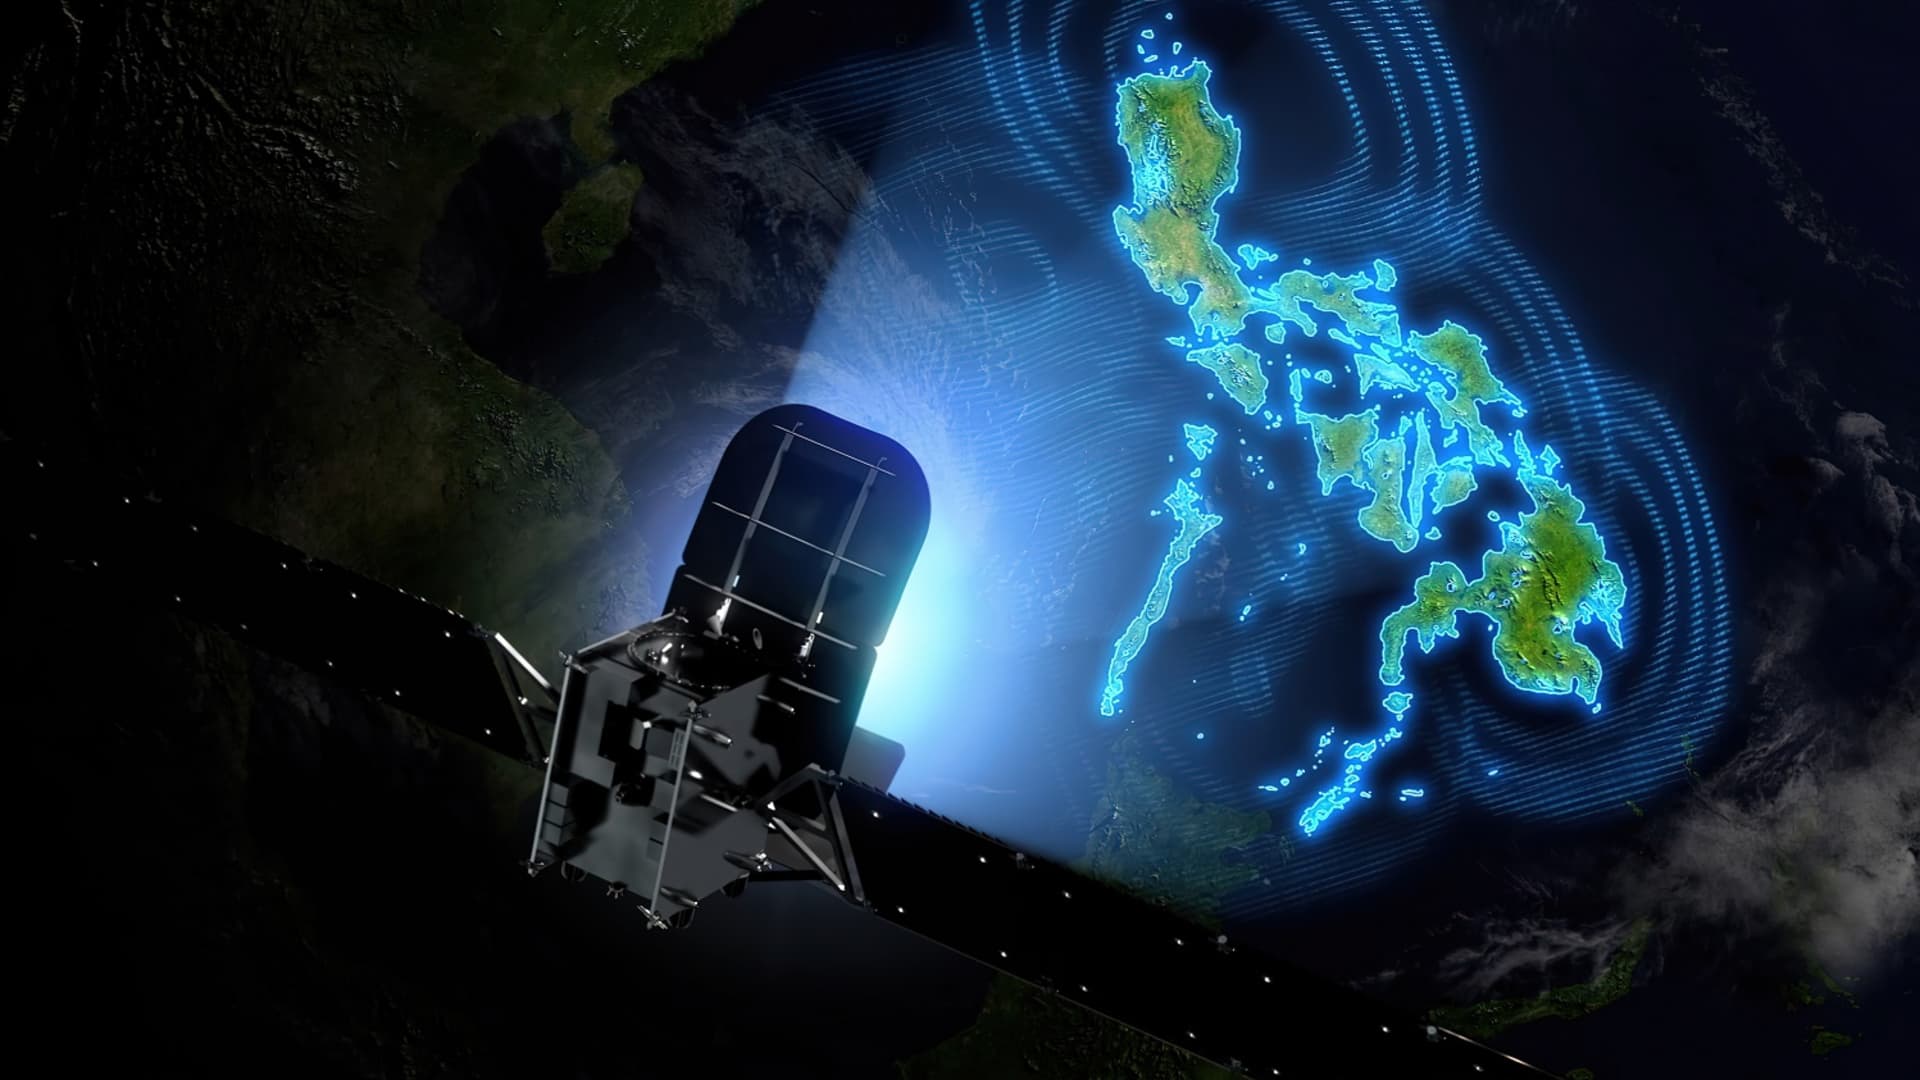 Astranis satellite internet coming to the Philippines next year